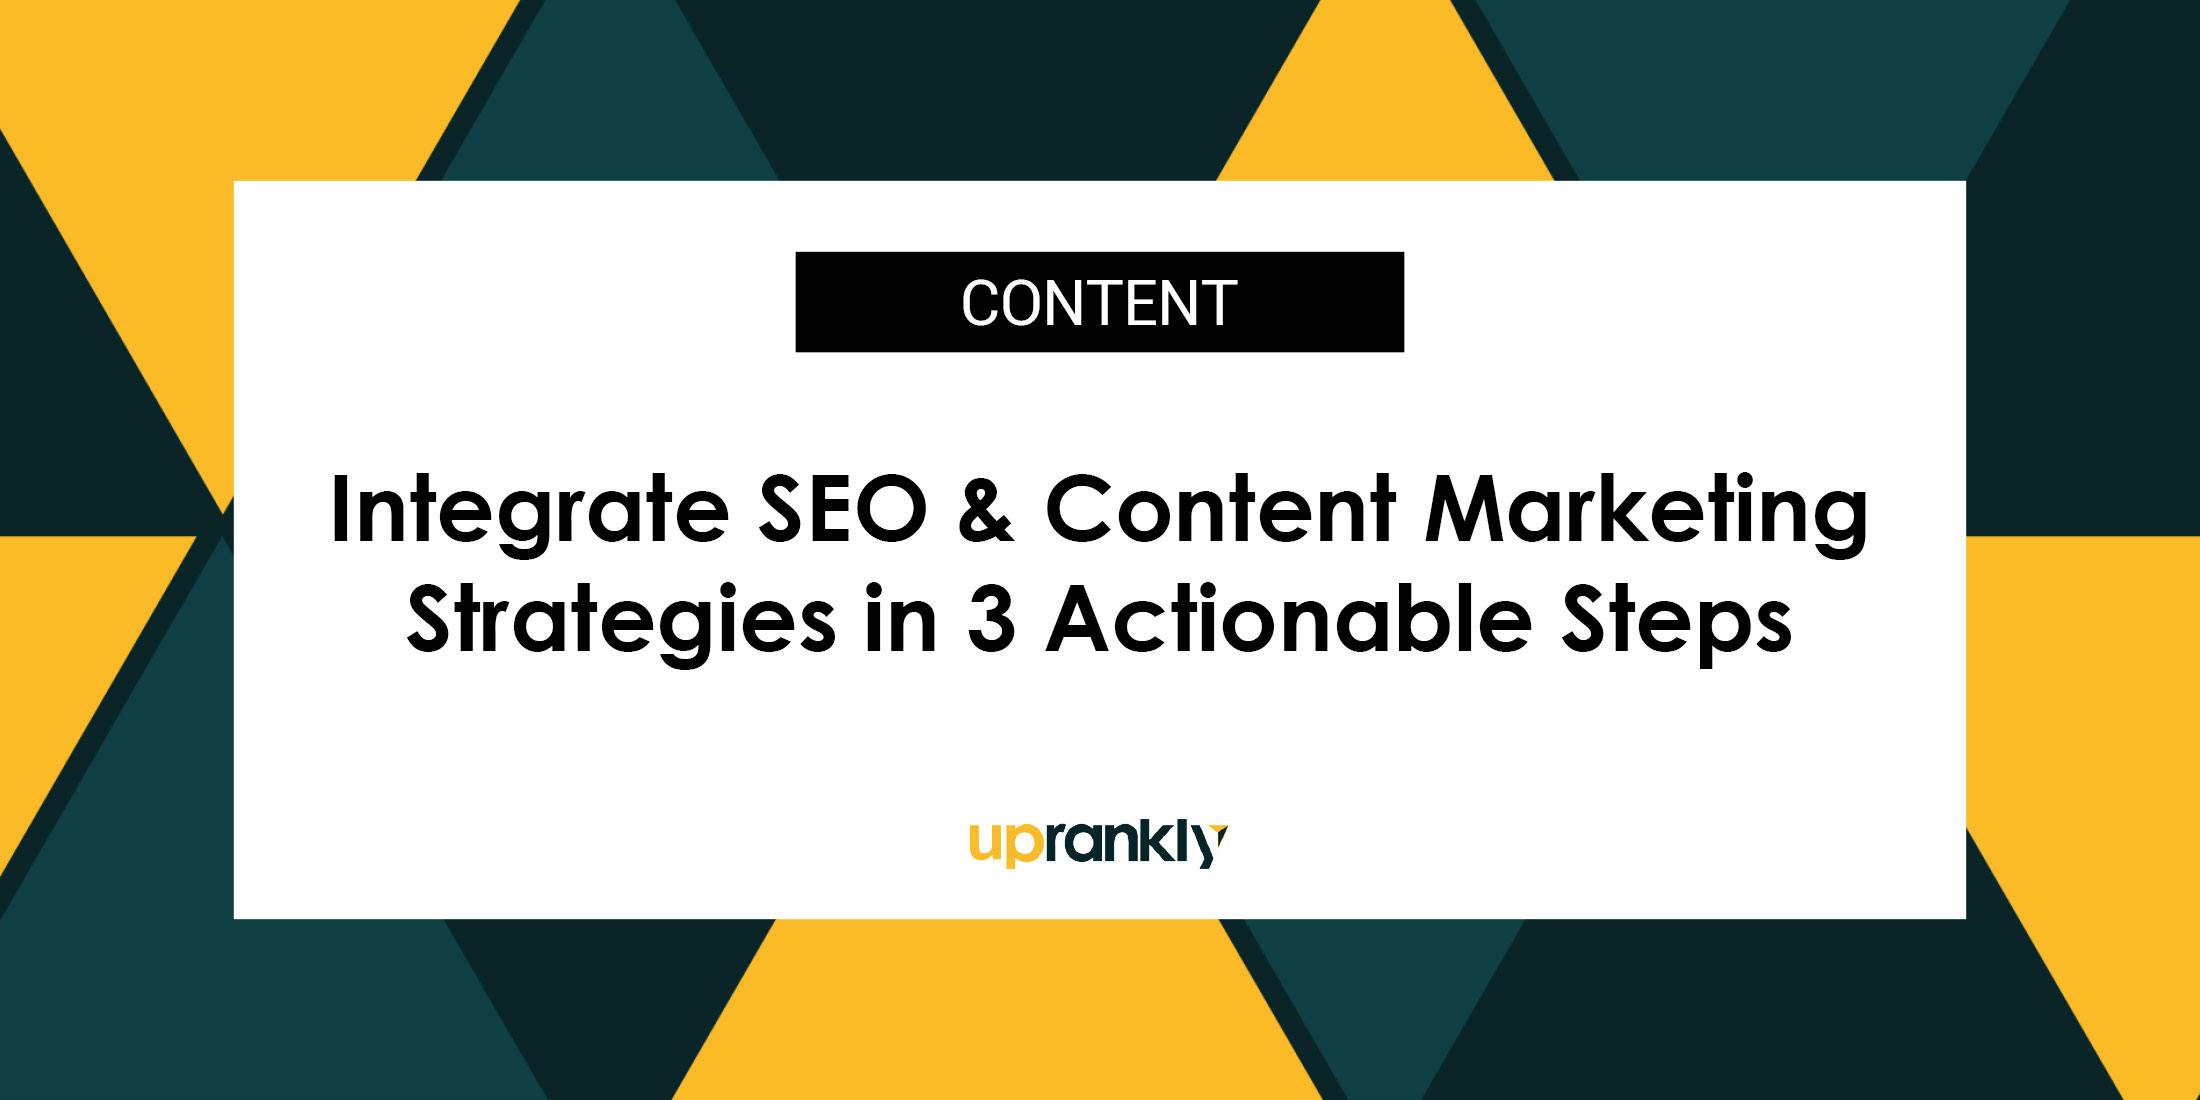 How to Integrate Your SEO and Content Marketing Strategies in 3 Actionable Steps